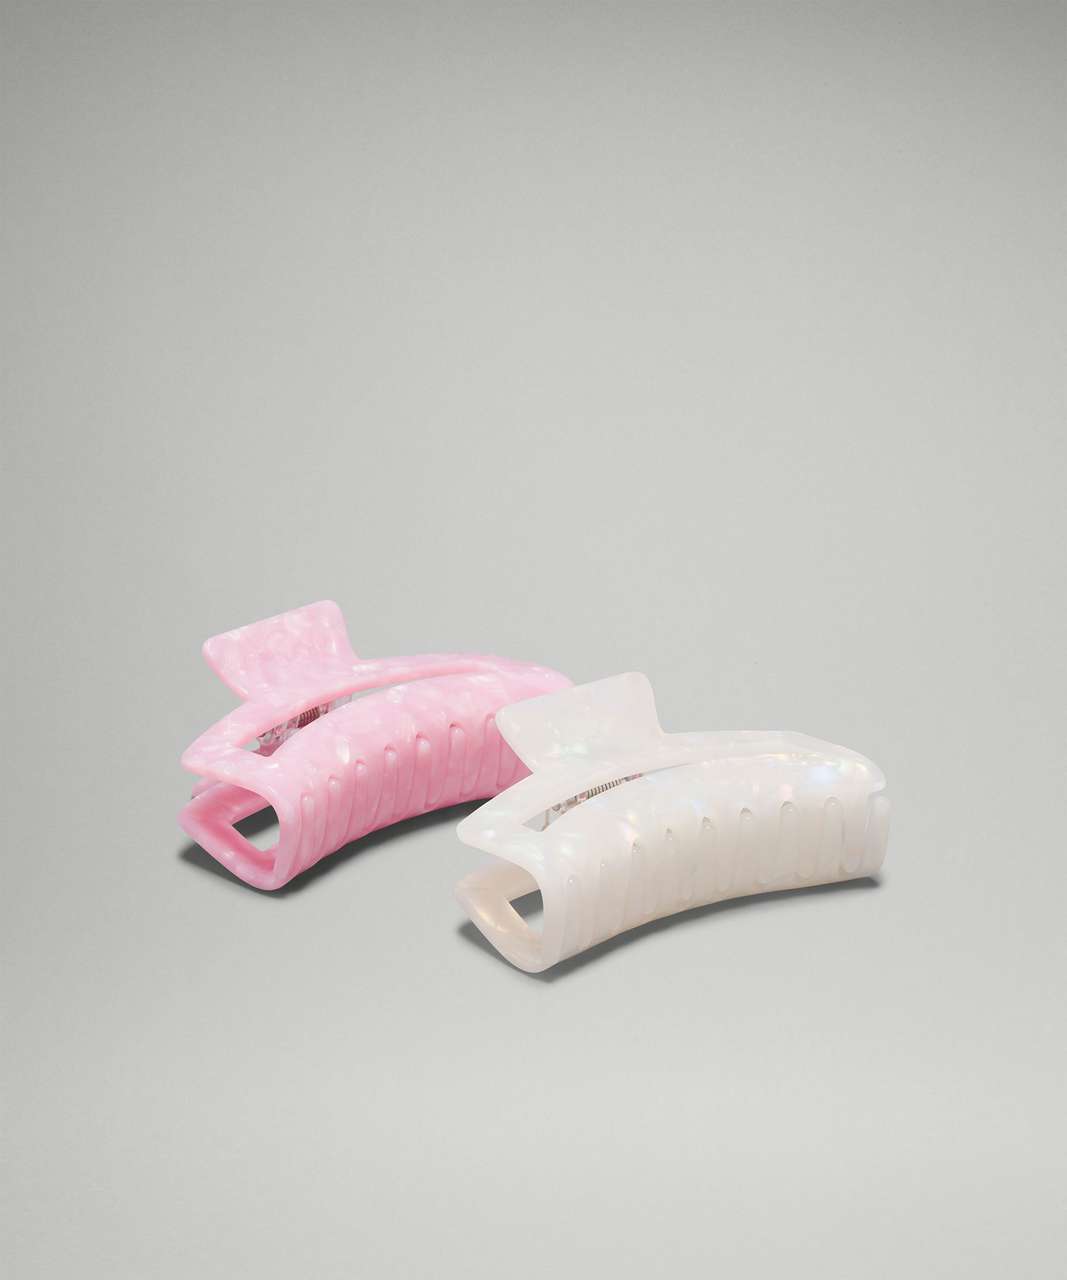 Lululemon Large Claw Hair Clips *2 Pack - White Opal / Silverstone / Pink Parfait / Pink Peony